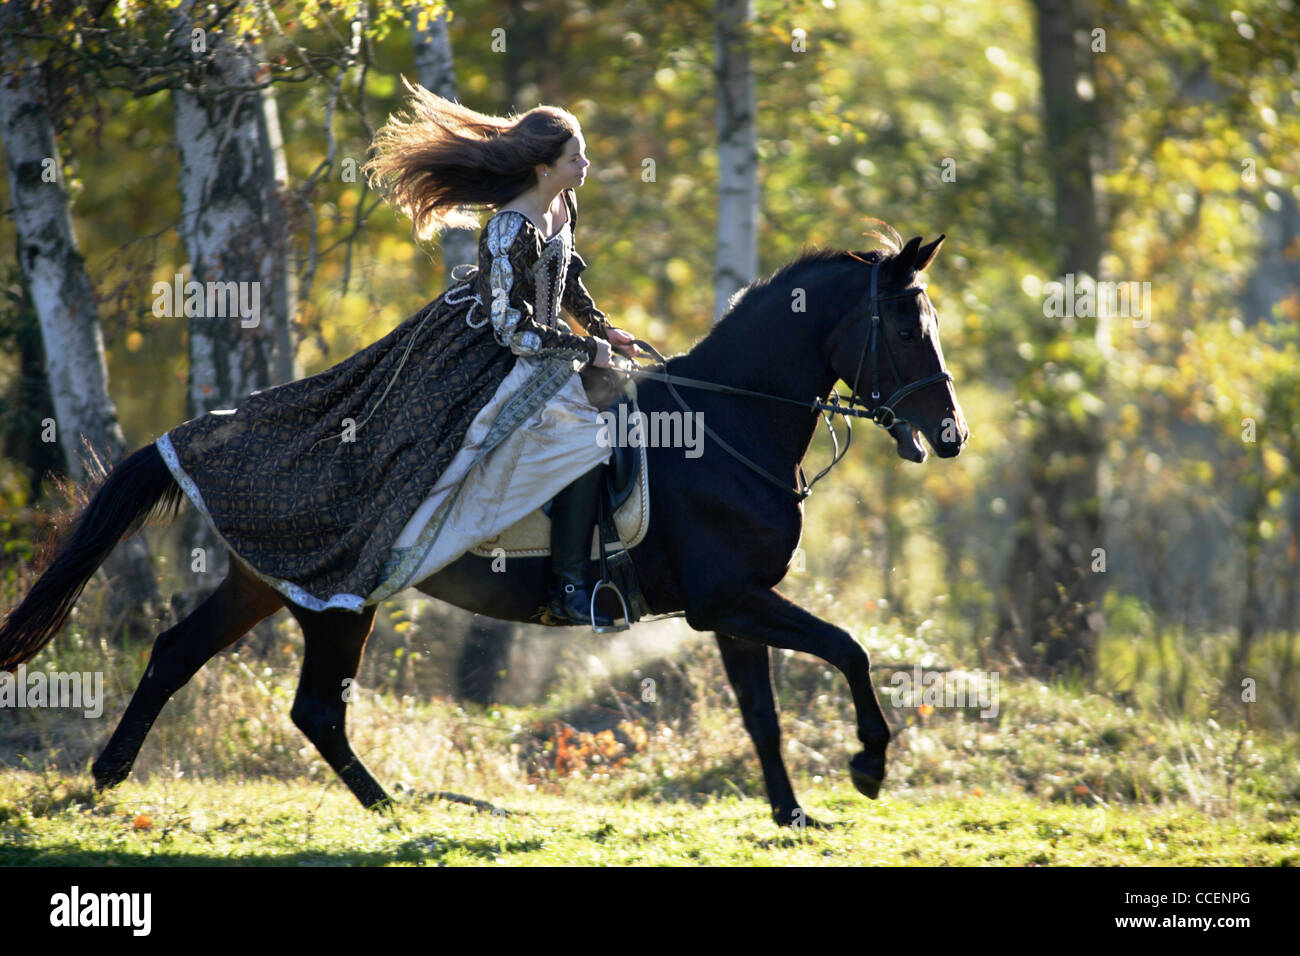 young woman in medieval dress on horseback Stock Photo